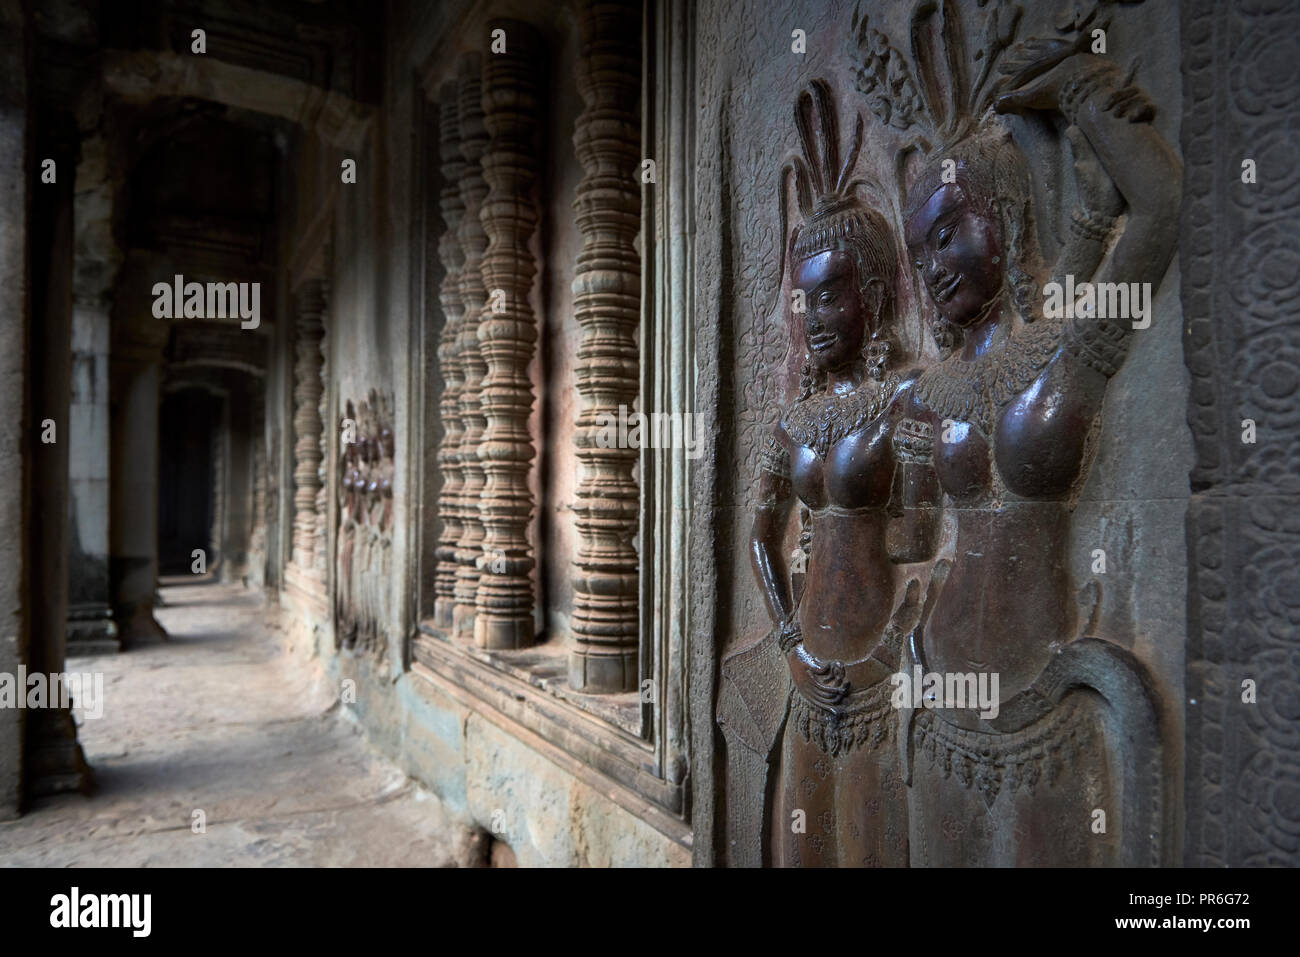 Corridor with dancers carved onto stone wall in Angkor Wat. The Angkor Wat complex, Built during the Khmer Empire age, located in Siem Reap, Cambodia, Stock Photo